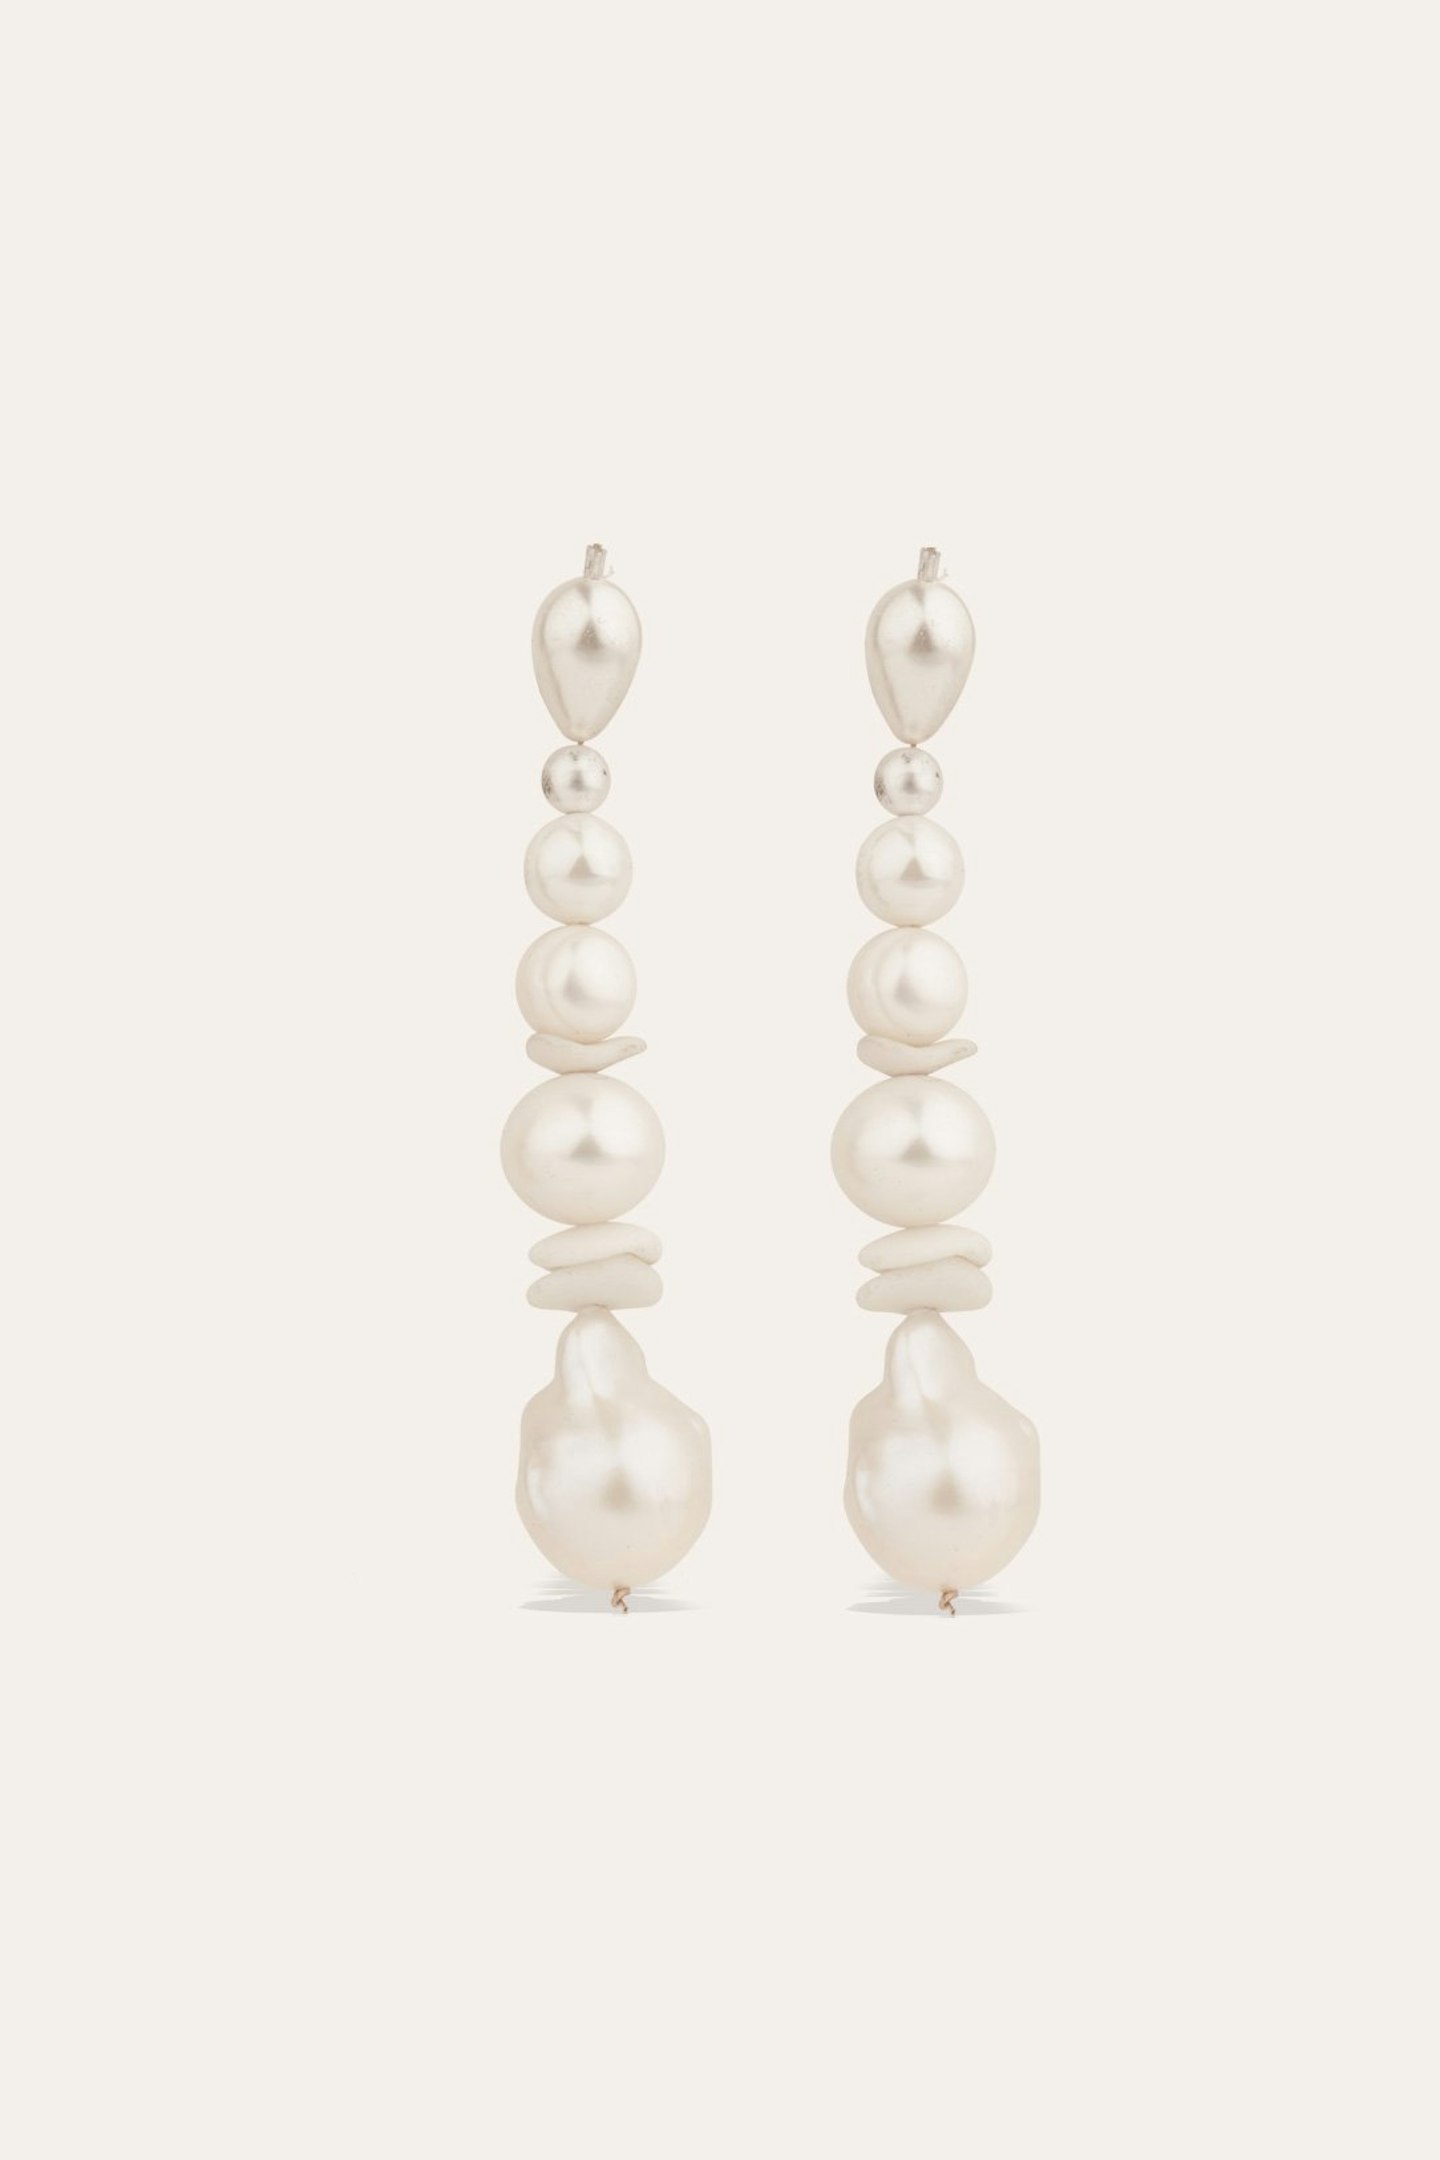 Completedworks, Gold Vermeil, Pearl And Ceramic Earrings, £255